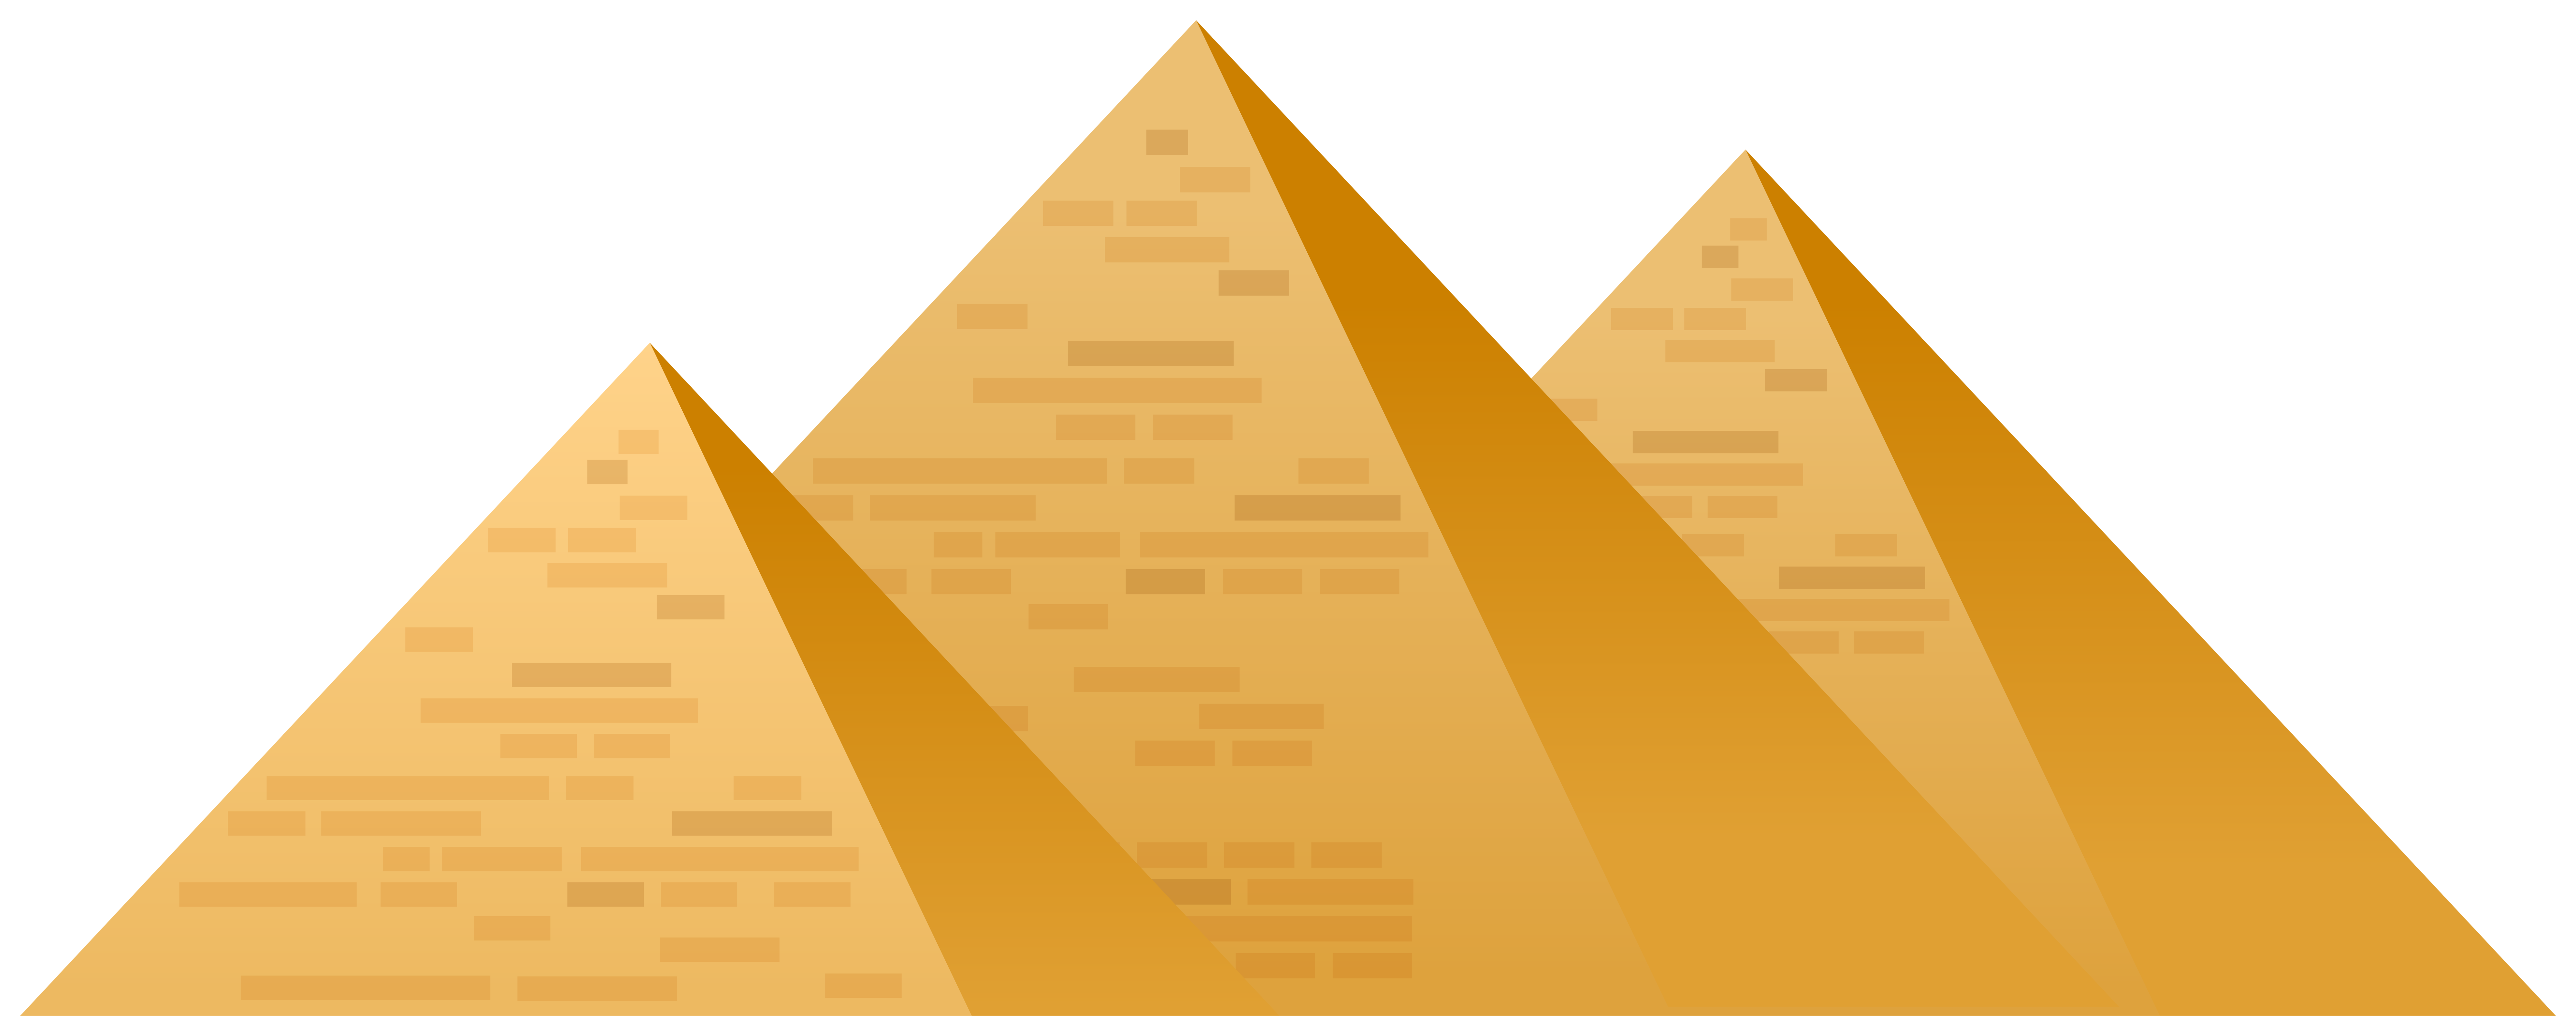 Egypt clipart pyramids, Egypt pyramids Transparent FREE for download on ...